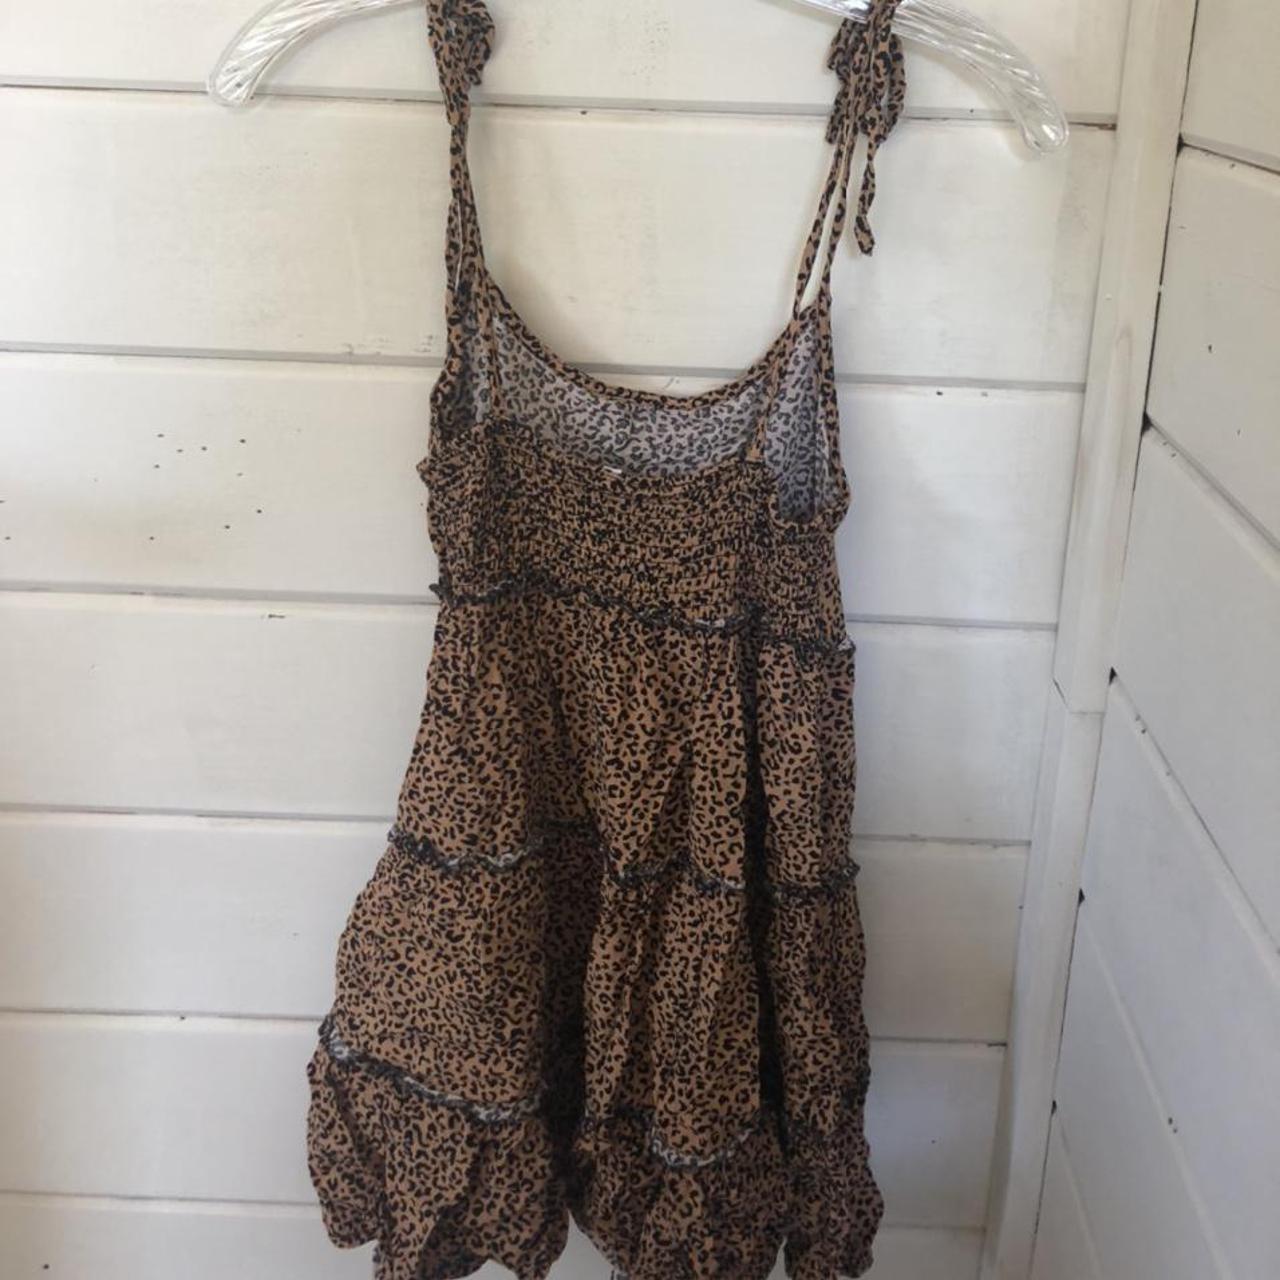 Product Image 2 - Leopard print ruffle sundress with